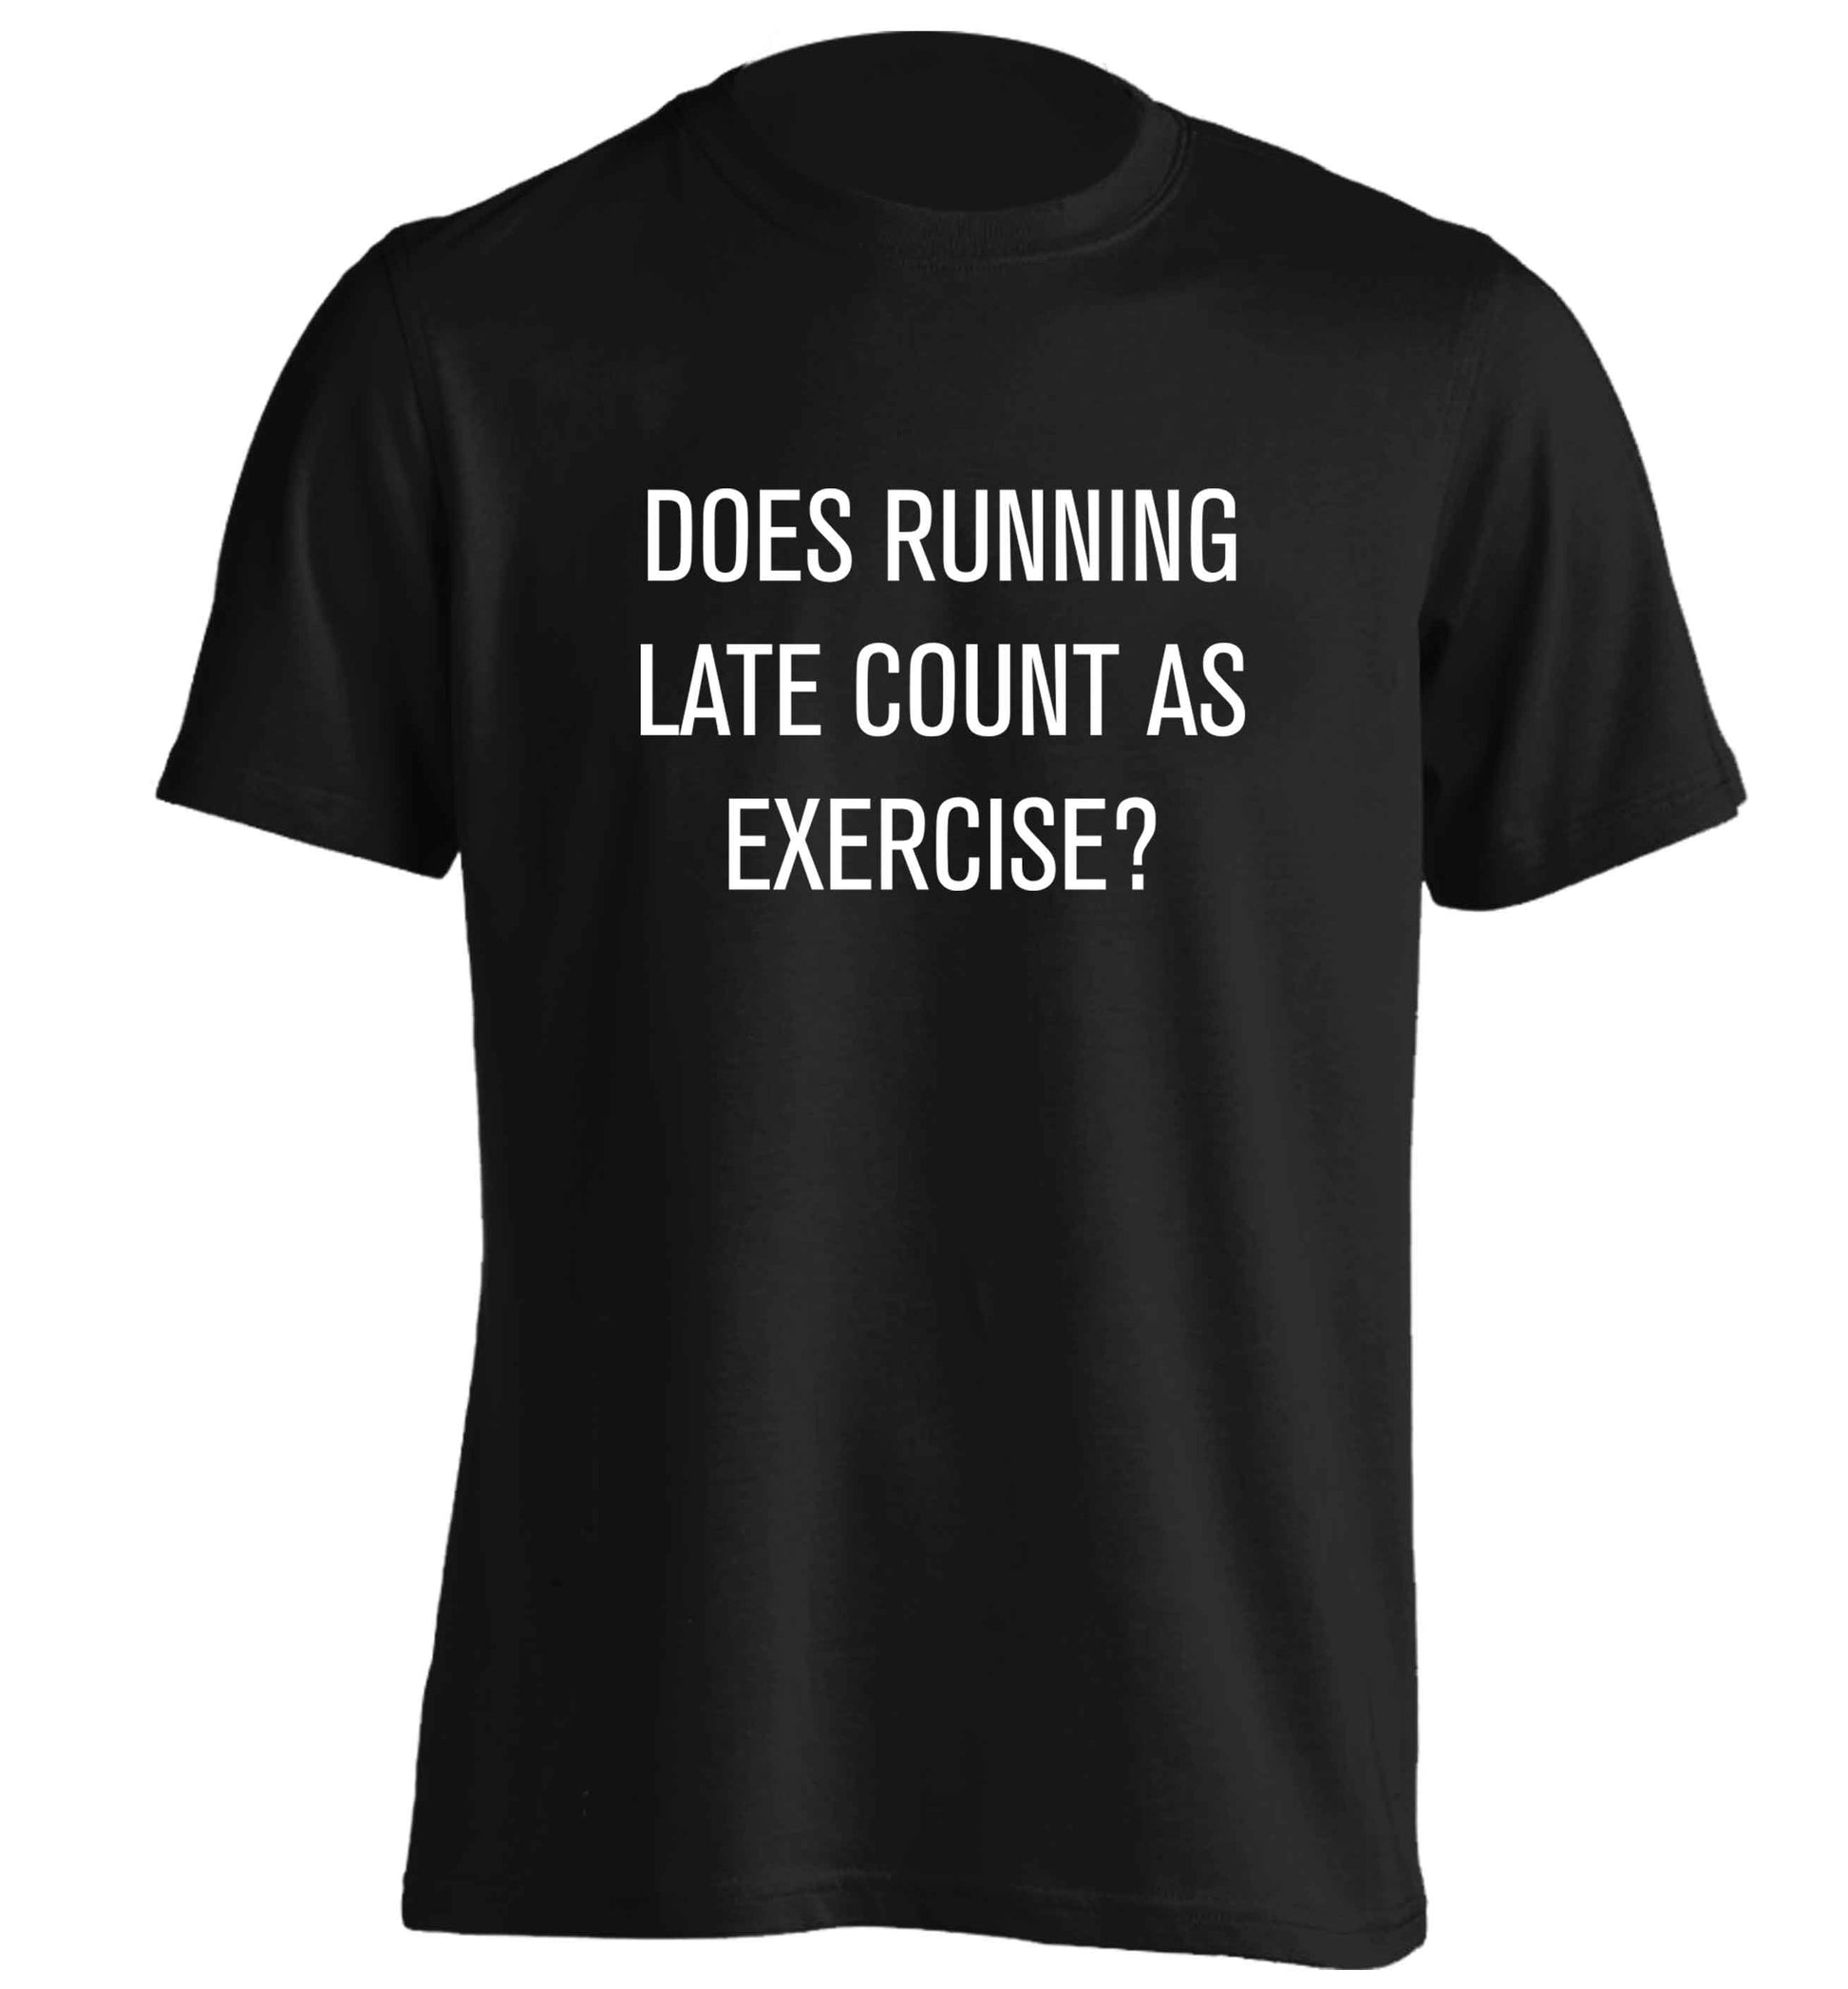 Does running late count as exercise? adults unisex black Tshirt 2XL